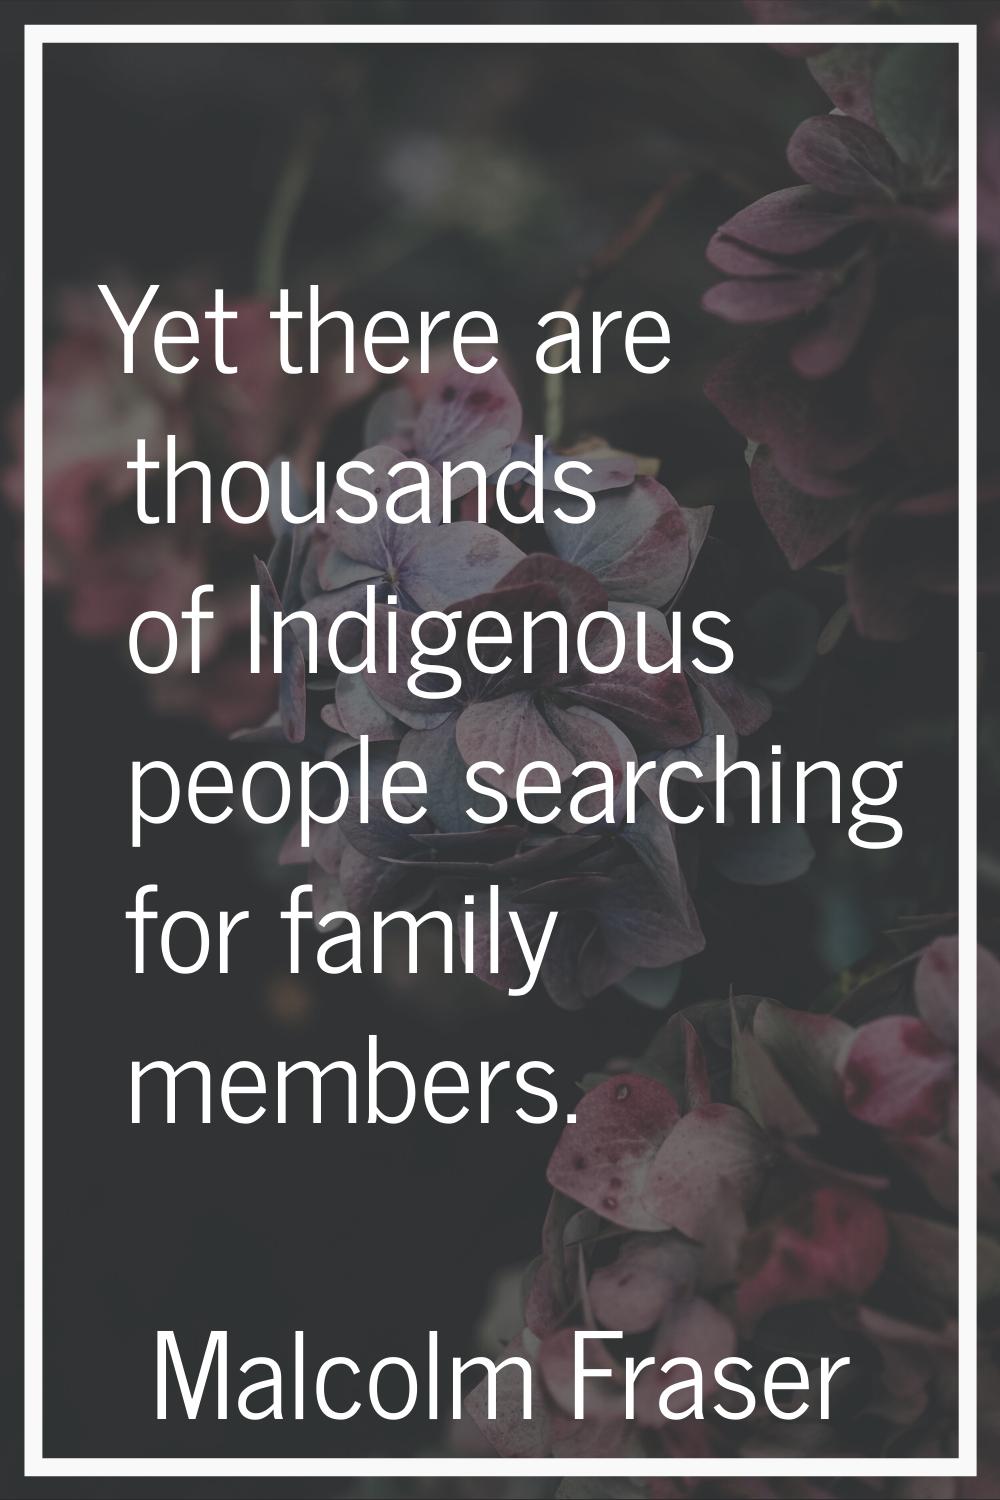 Yet there are thousands of Indigenous people searching for family members.